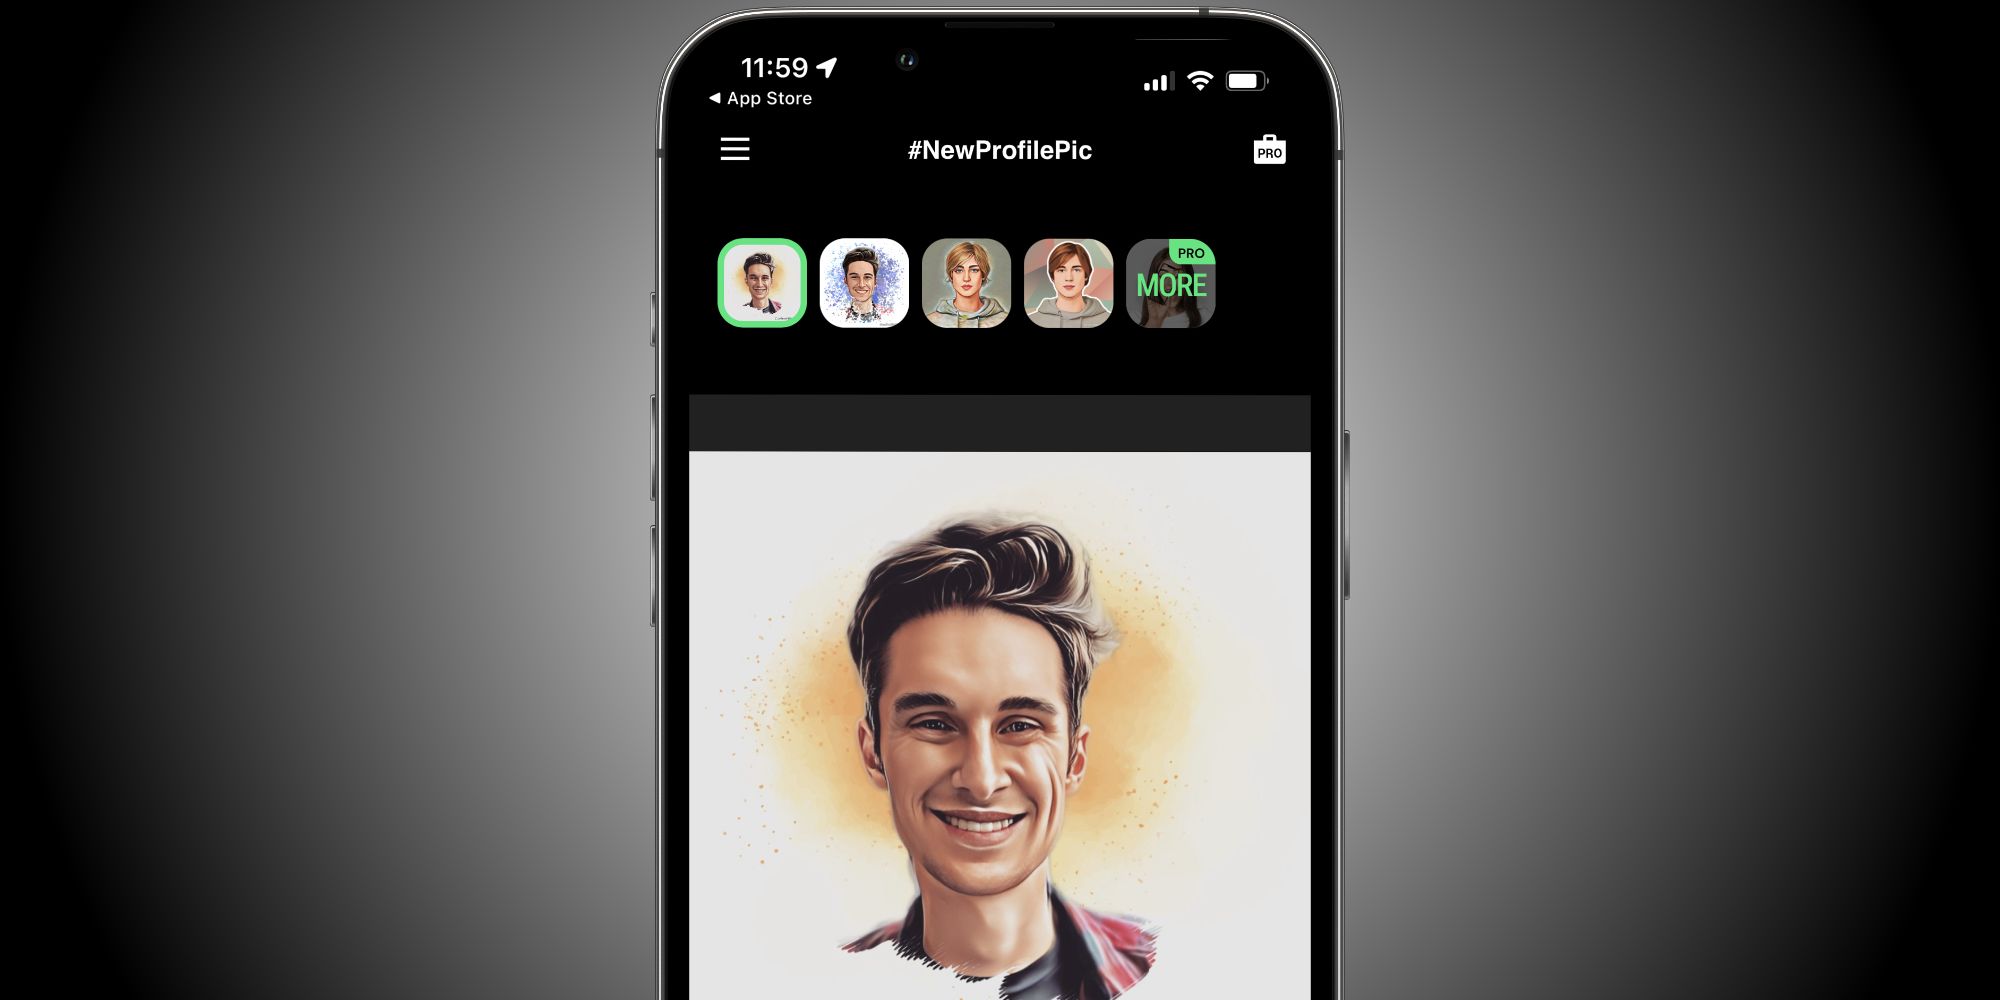 Is The New Profile Pic App On Android? Everything You Need To Know